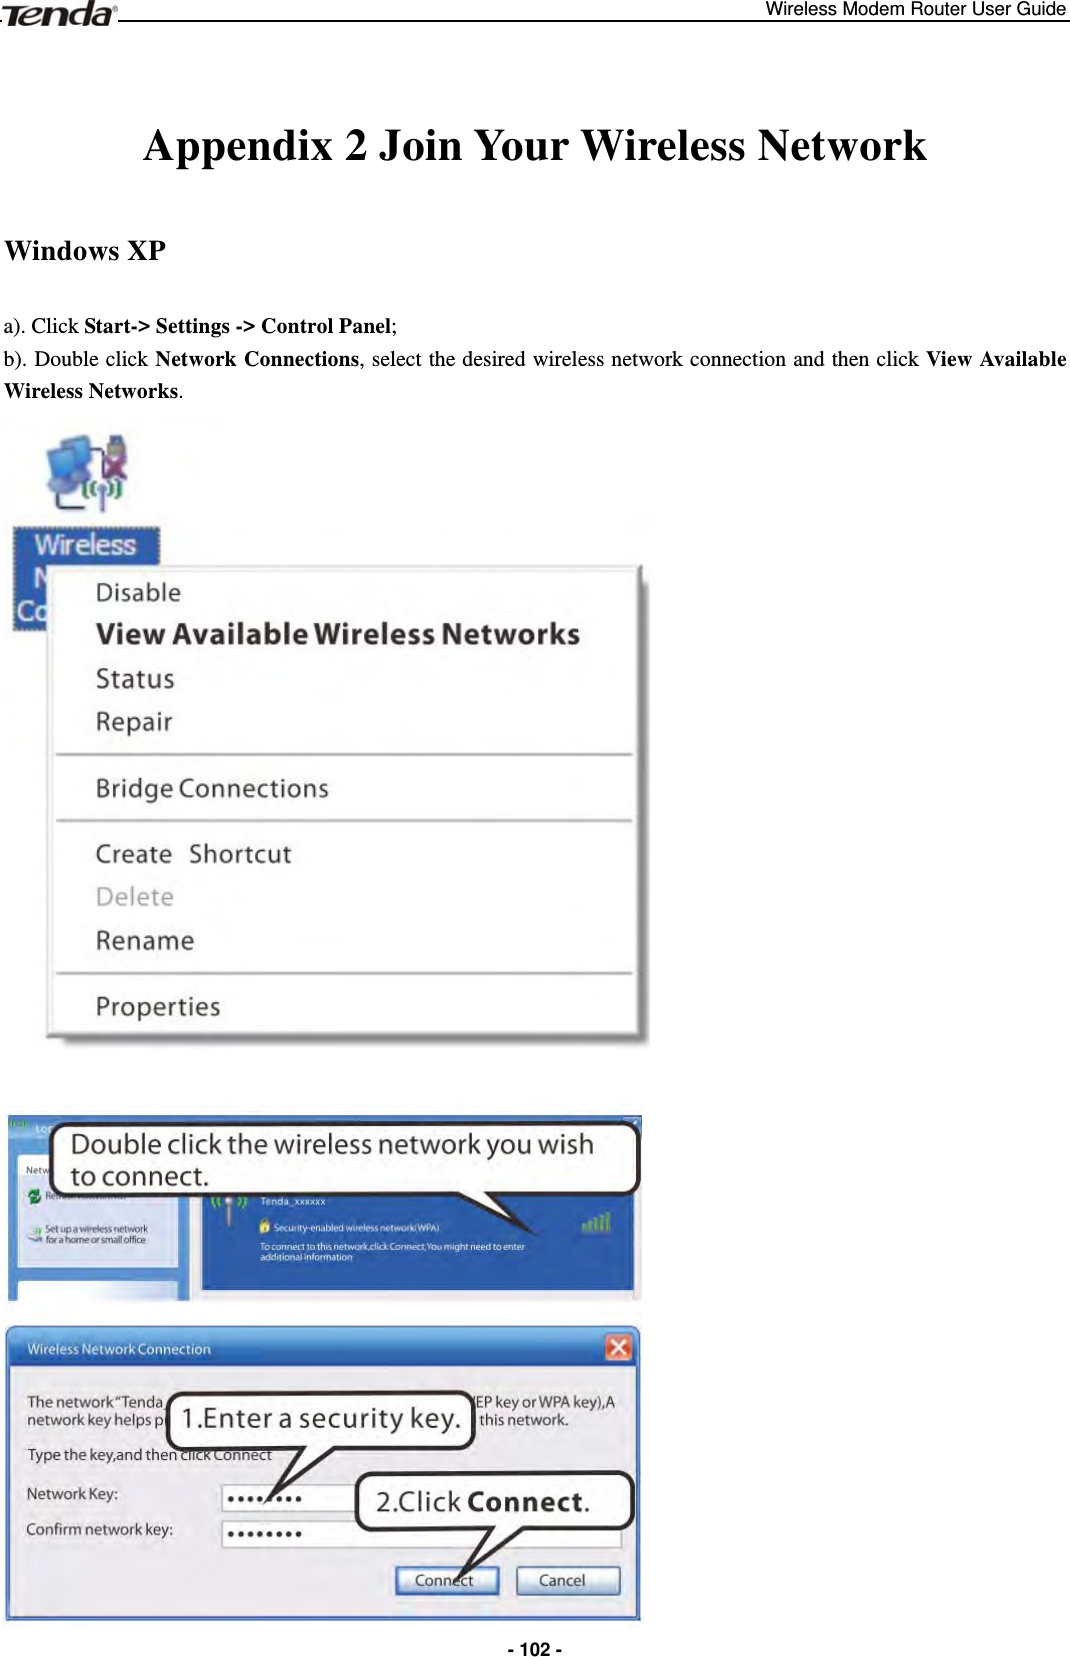 Wireless Modem Router User Guide  - 102 -Appendix 2 Join Your Wireless Network Windows XP a). Click Start-&gt; Settings -&gt; Control Panel; b). Double click Network Connections, select the desired wireless network connection and then click View Available Wireless Networks.    